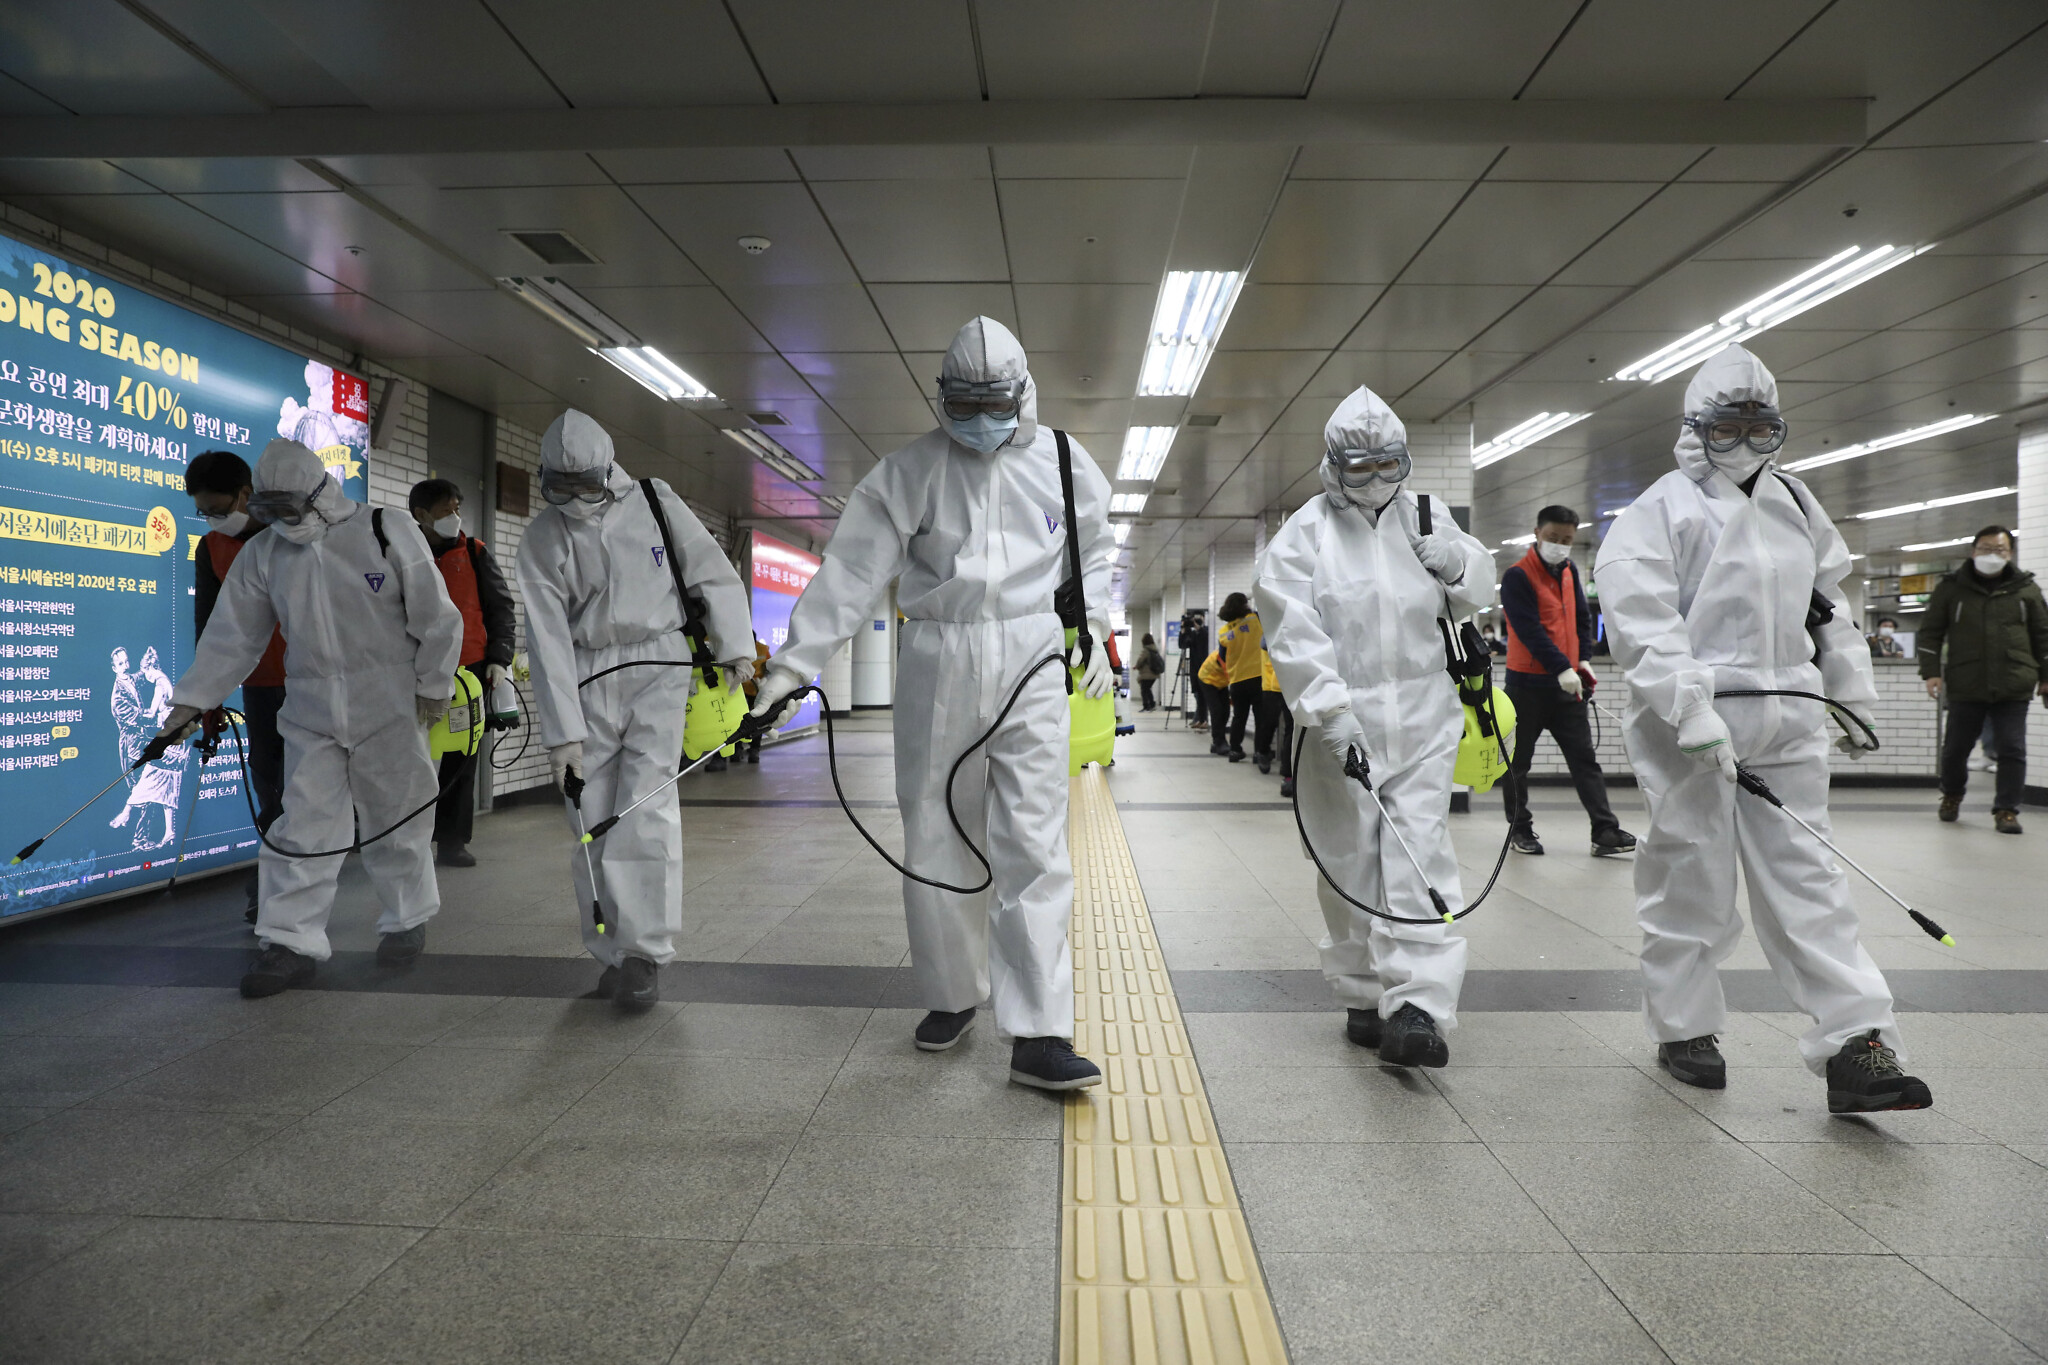 Workers wearing protective gears disinfect as a precaution against the new coronavirus at the subway station in Seoul, South Korea, Wednesday, March 11, 2020. (Kim Sun-woong/Newsis via AP)